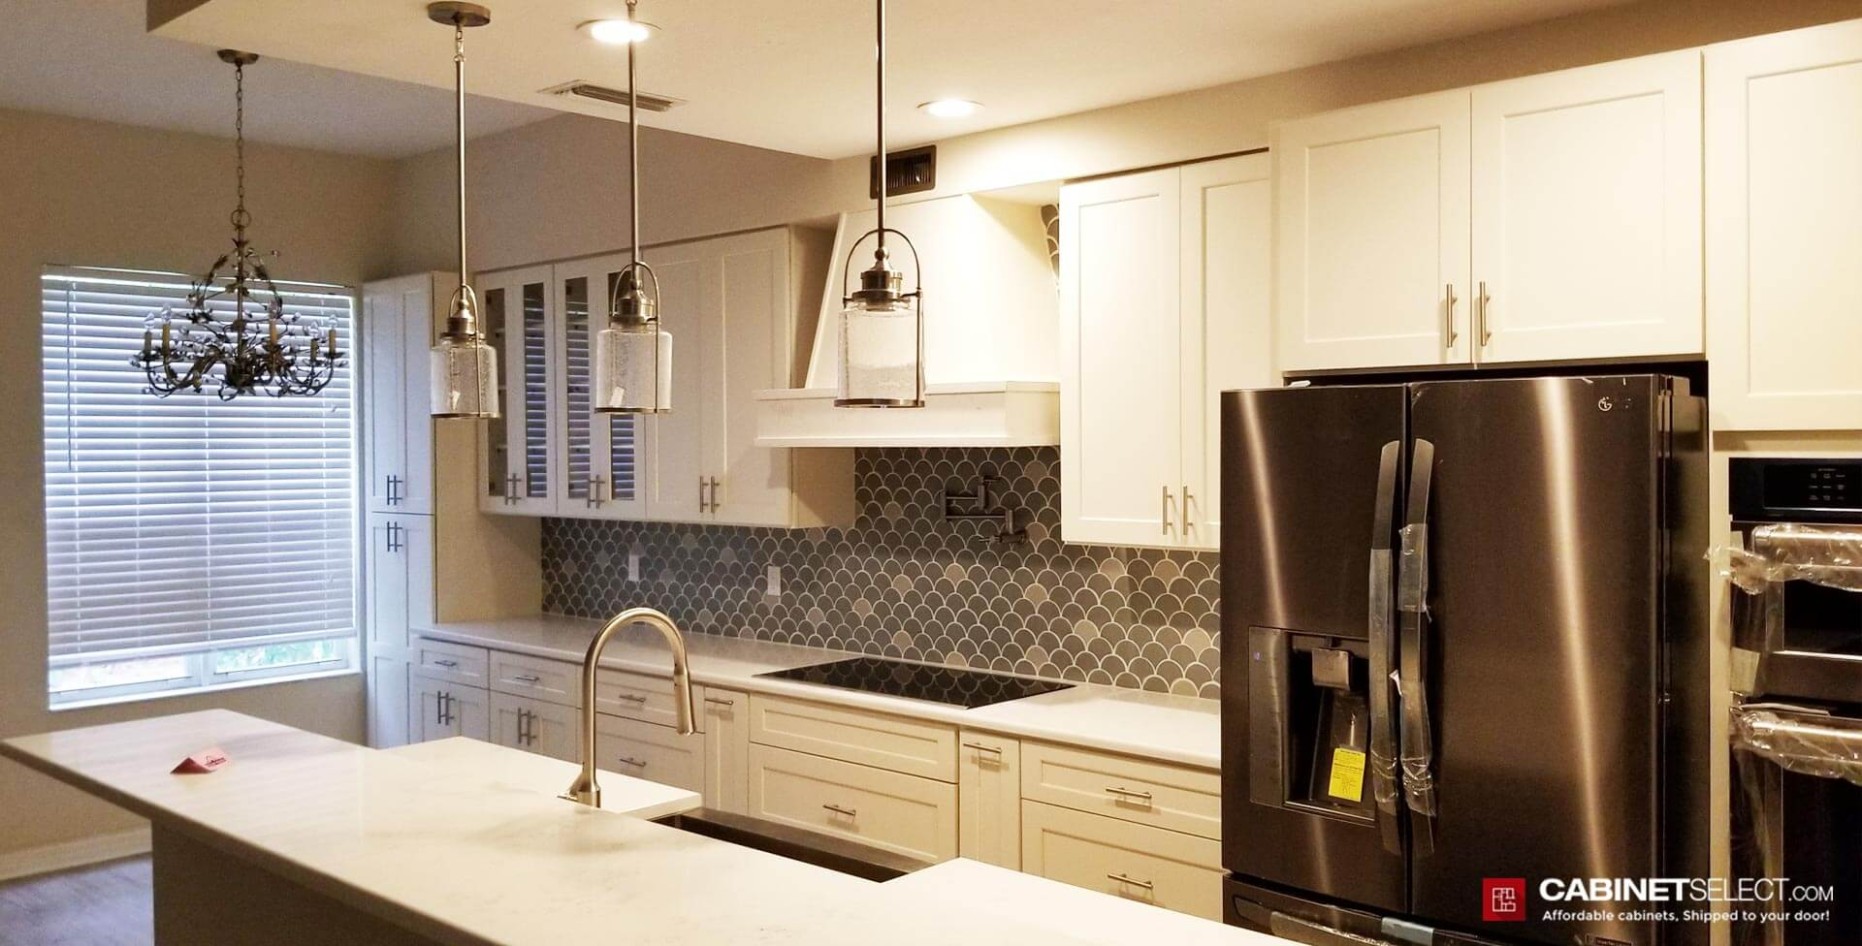 How Much Do Kitchen Cabinets Cost? - CabinetSelect